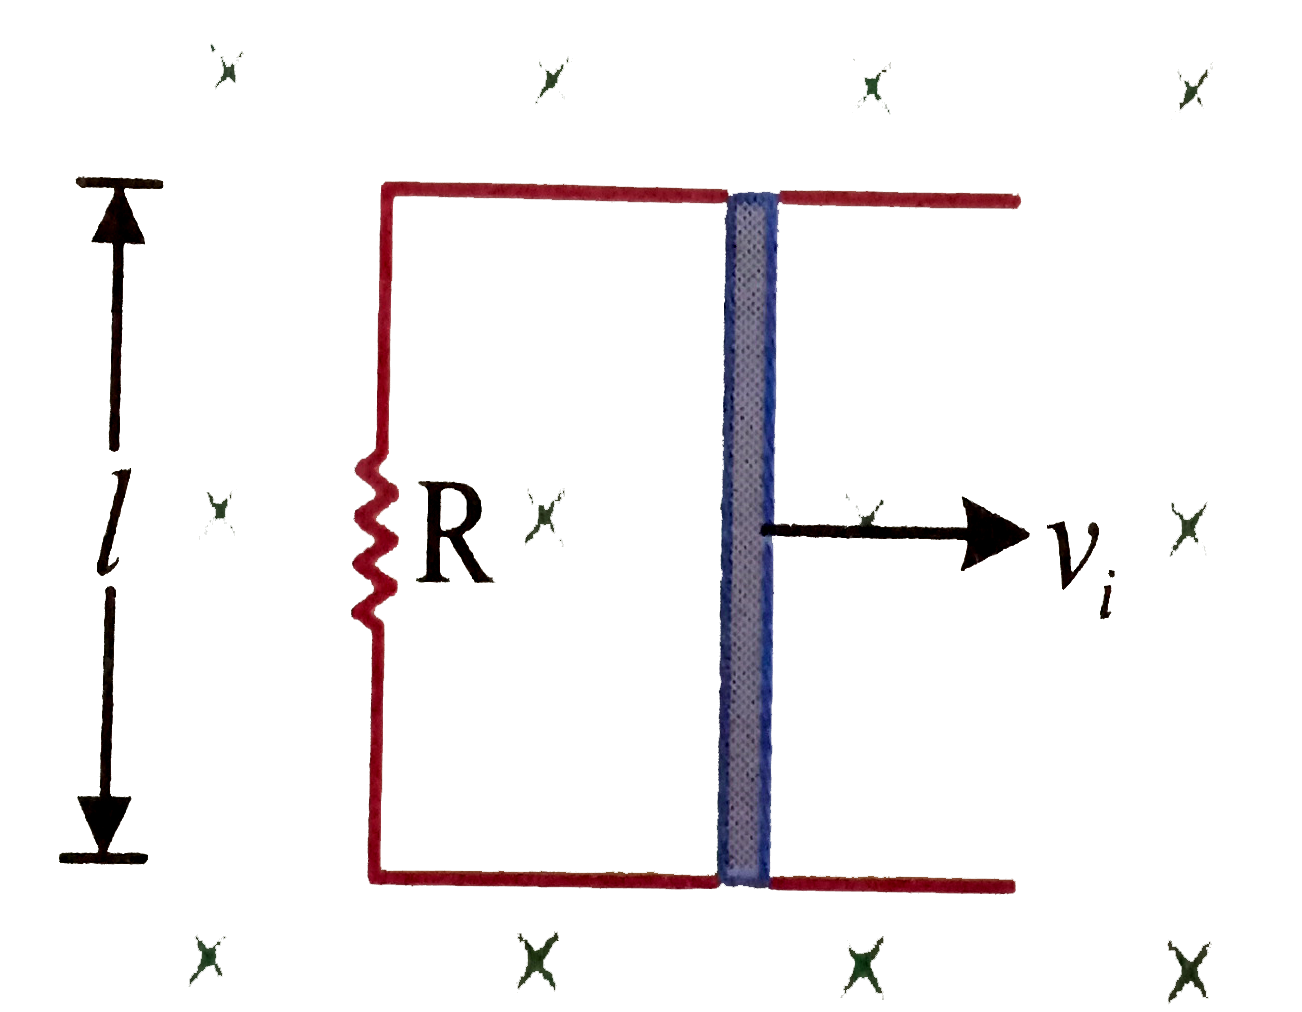 A bar of mass m and length l moves on two frictionless parallel rails in the presence of a uniform magnetic field directed into the plane of the paper. The bar is given and initial velocity v(i) to the right and released. Find the velocity of bar, induced emf across the bar and the current in the circuit as a function of time